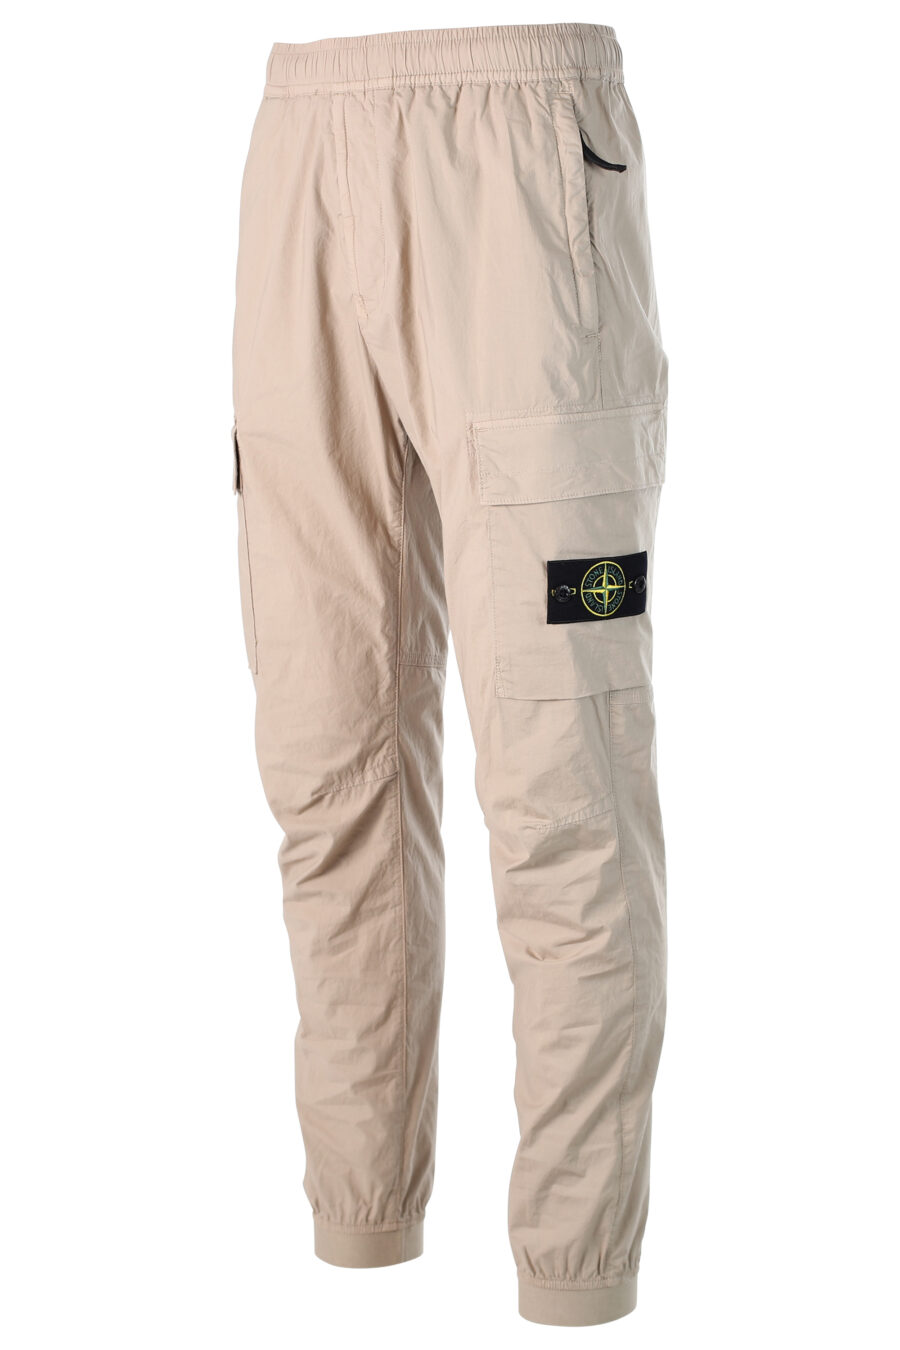 Beige cargo style trousers with patch - 8052572528552 2